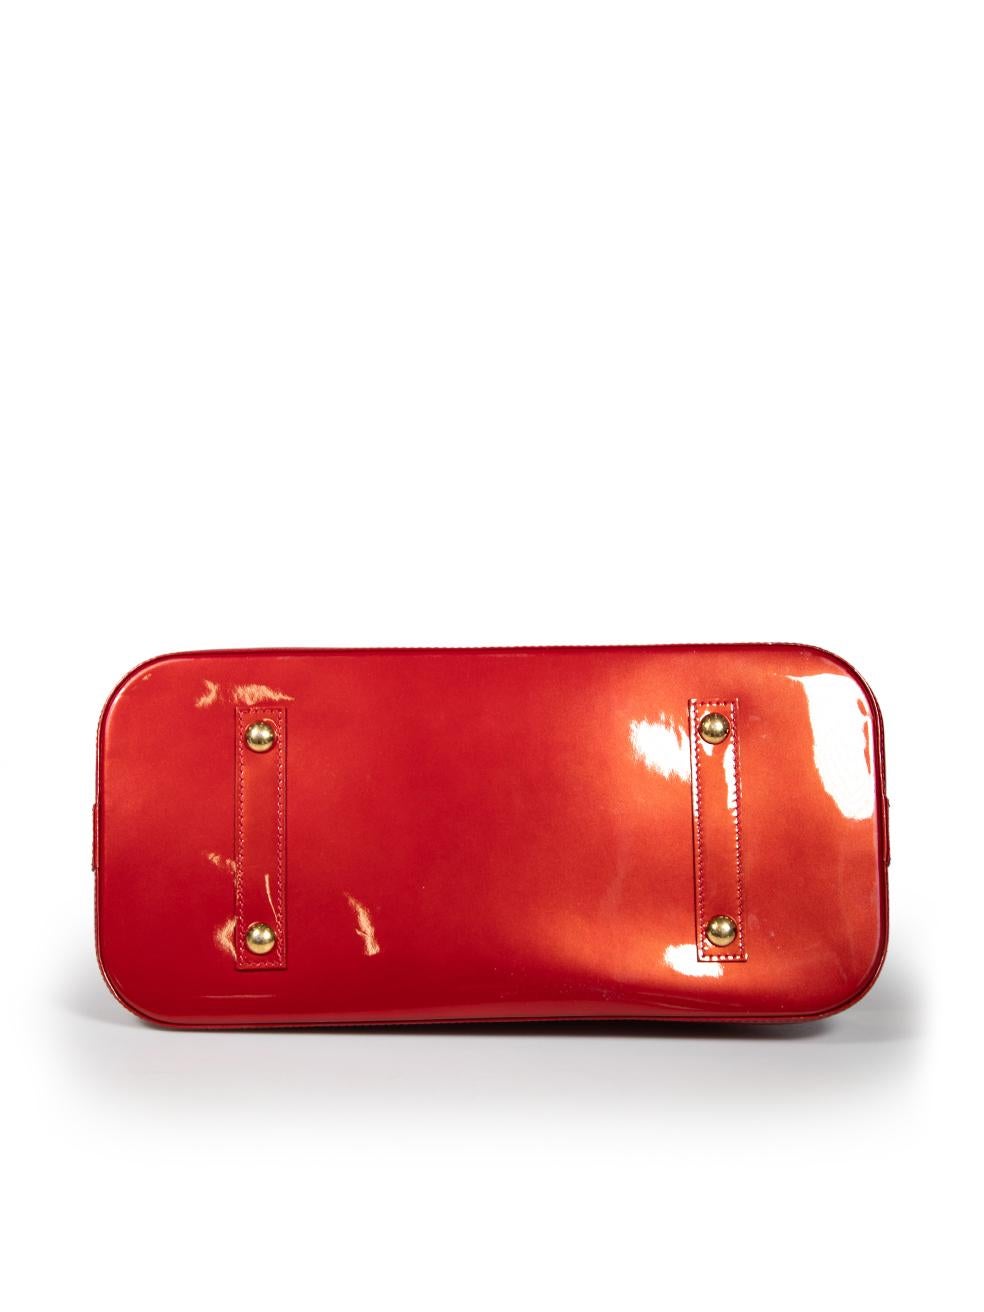 Women's Louis Vuitton 2013 Red Patent Leather Vernis Alma GM For Sale